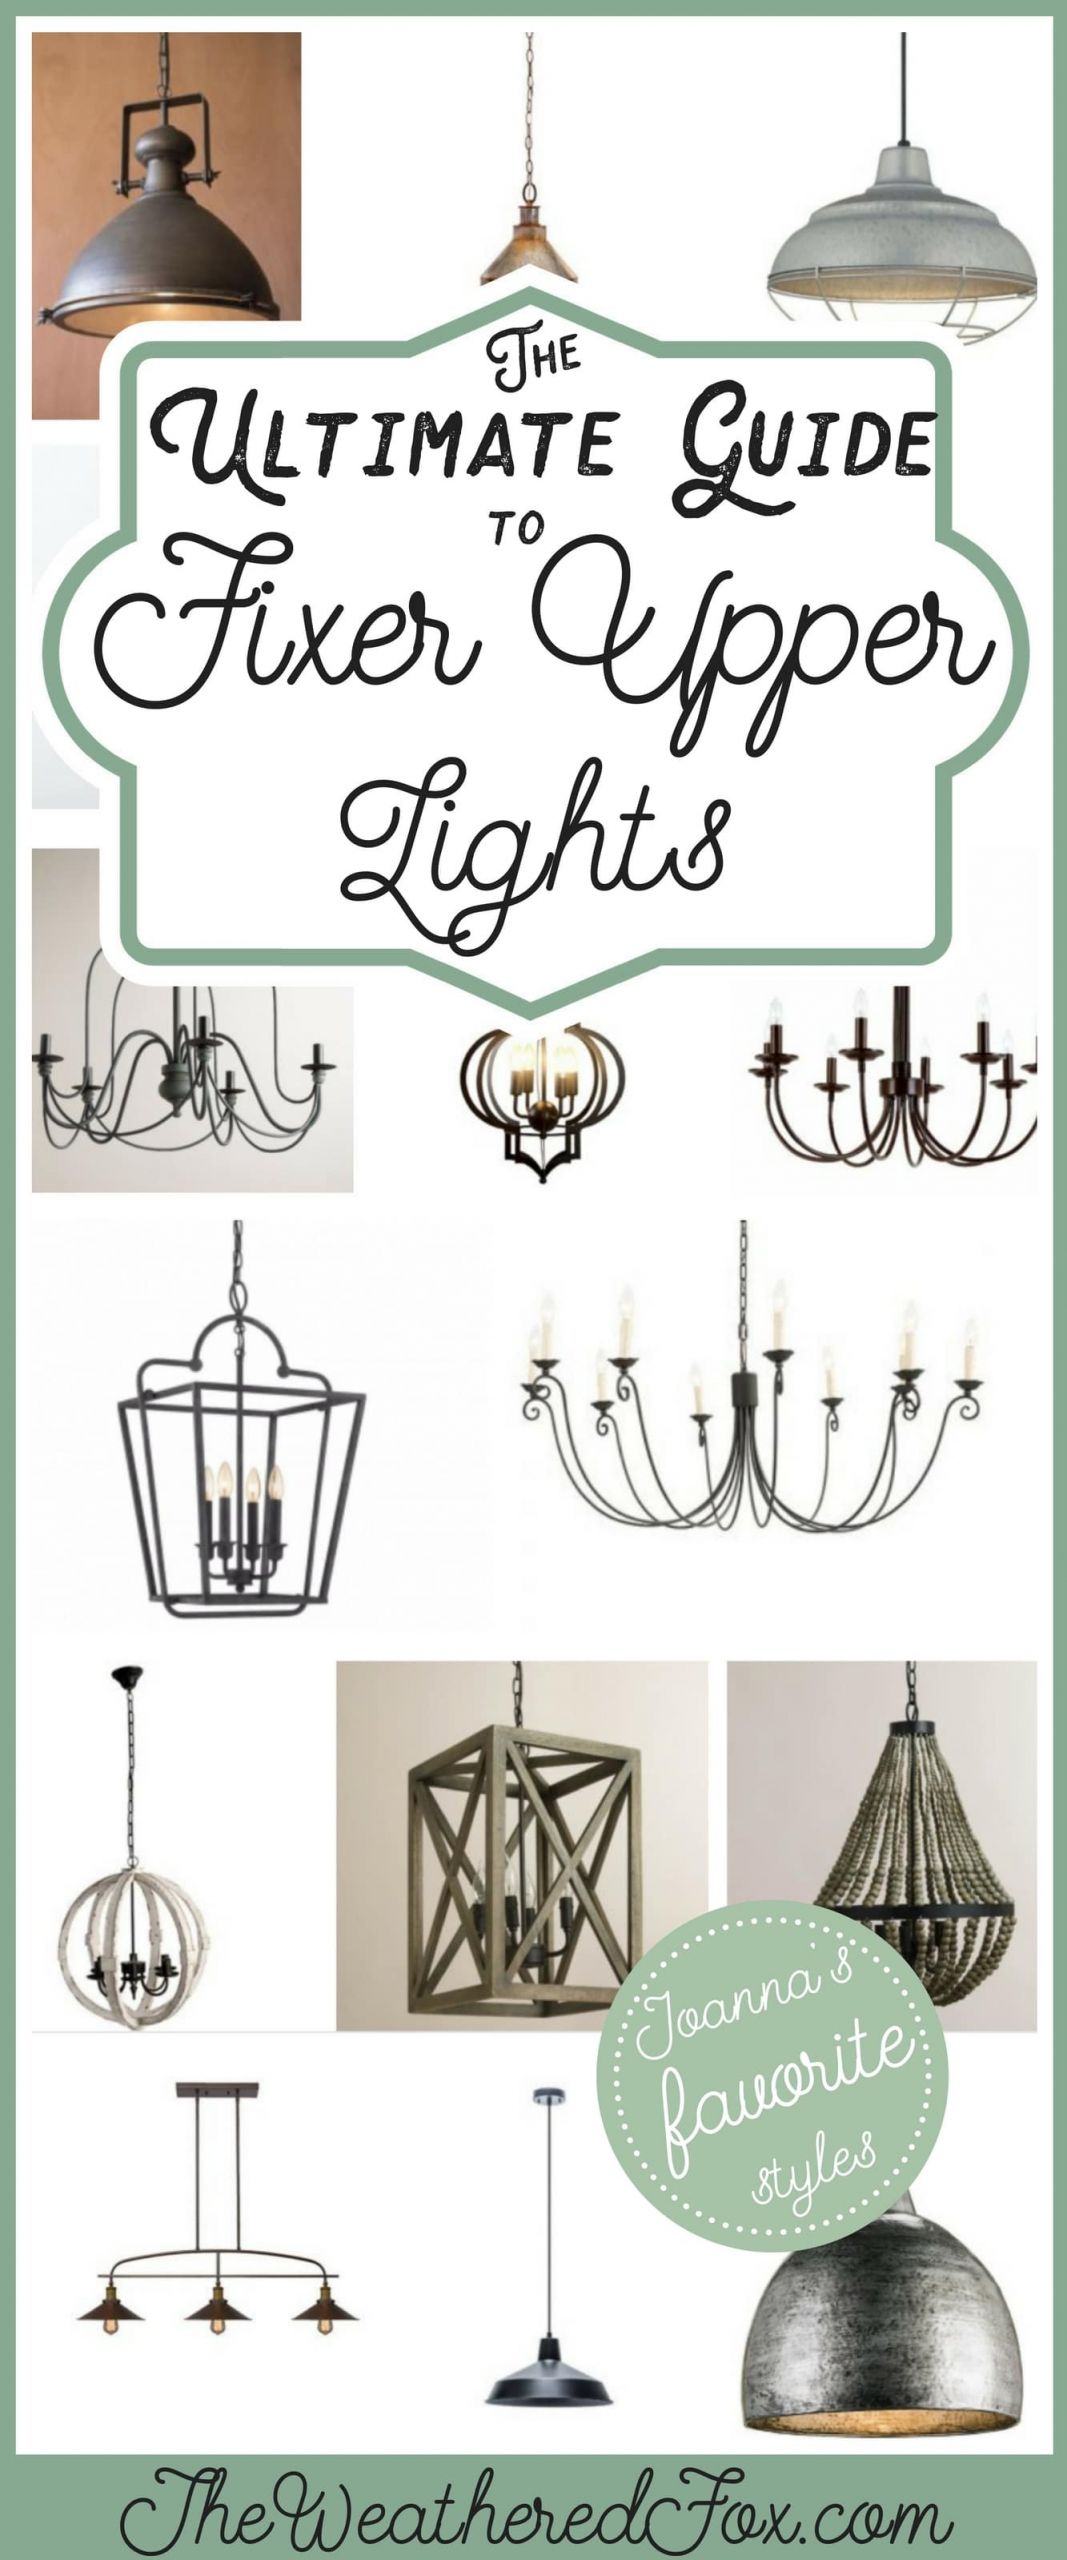 Joanna Gaines Kitchen Lighting
 Fixer Upper Lighting for Your Home The Weathered Fox